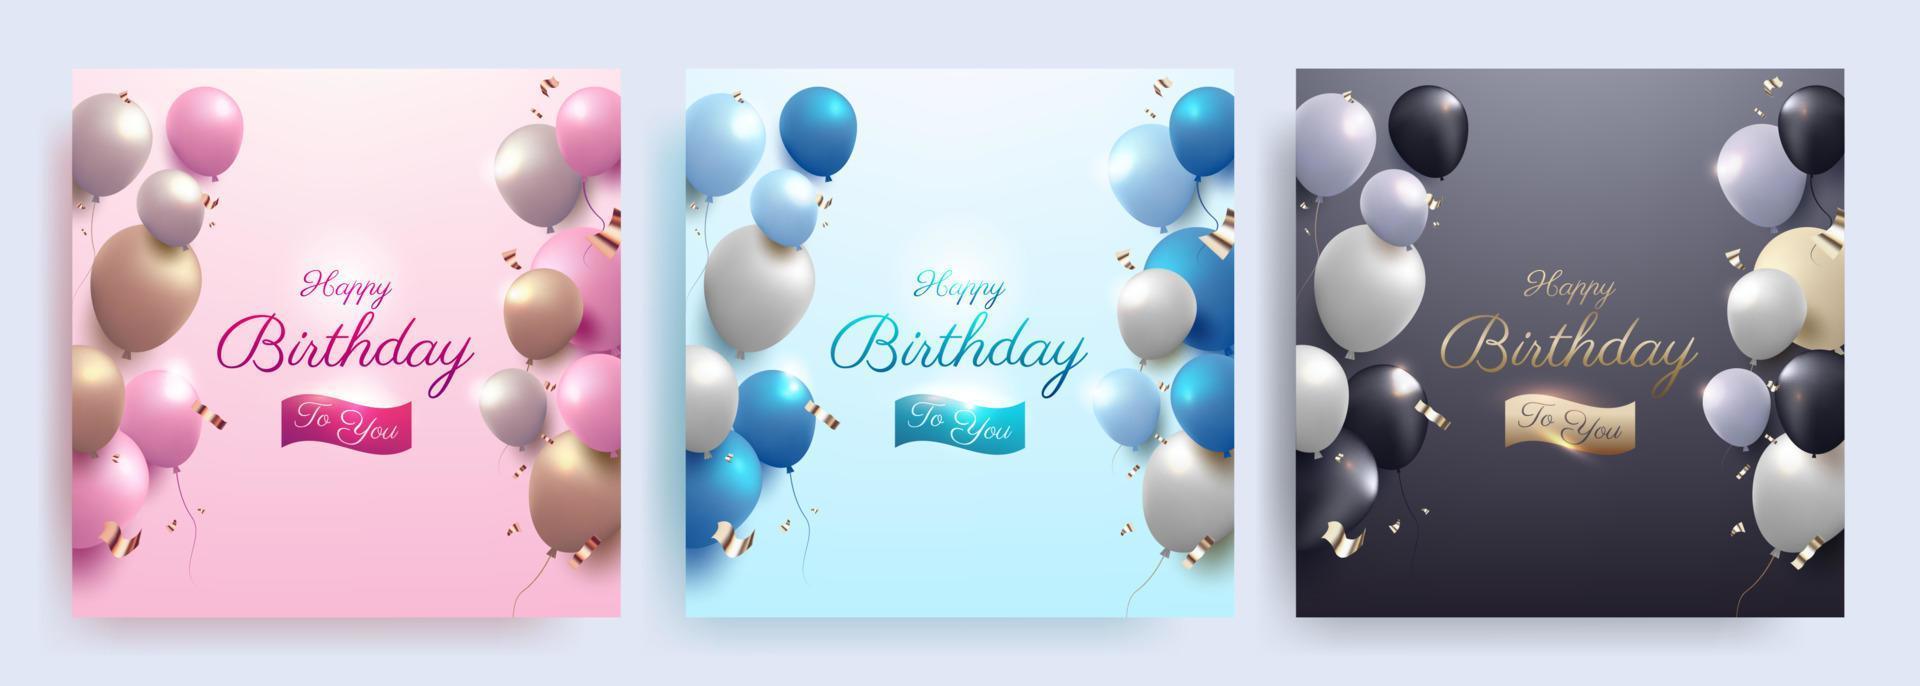 Set of Happy birthday celebration banner with realistic colorful balloons for social media post vector